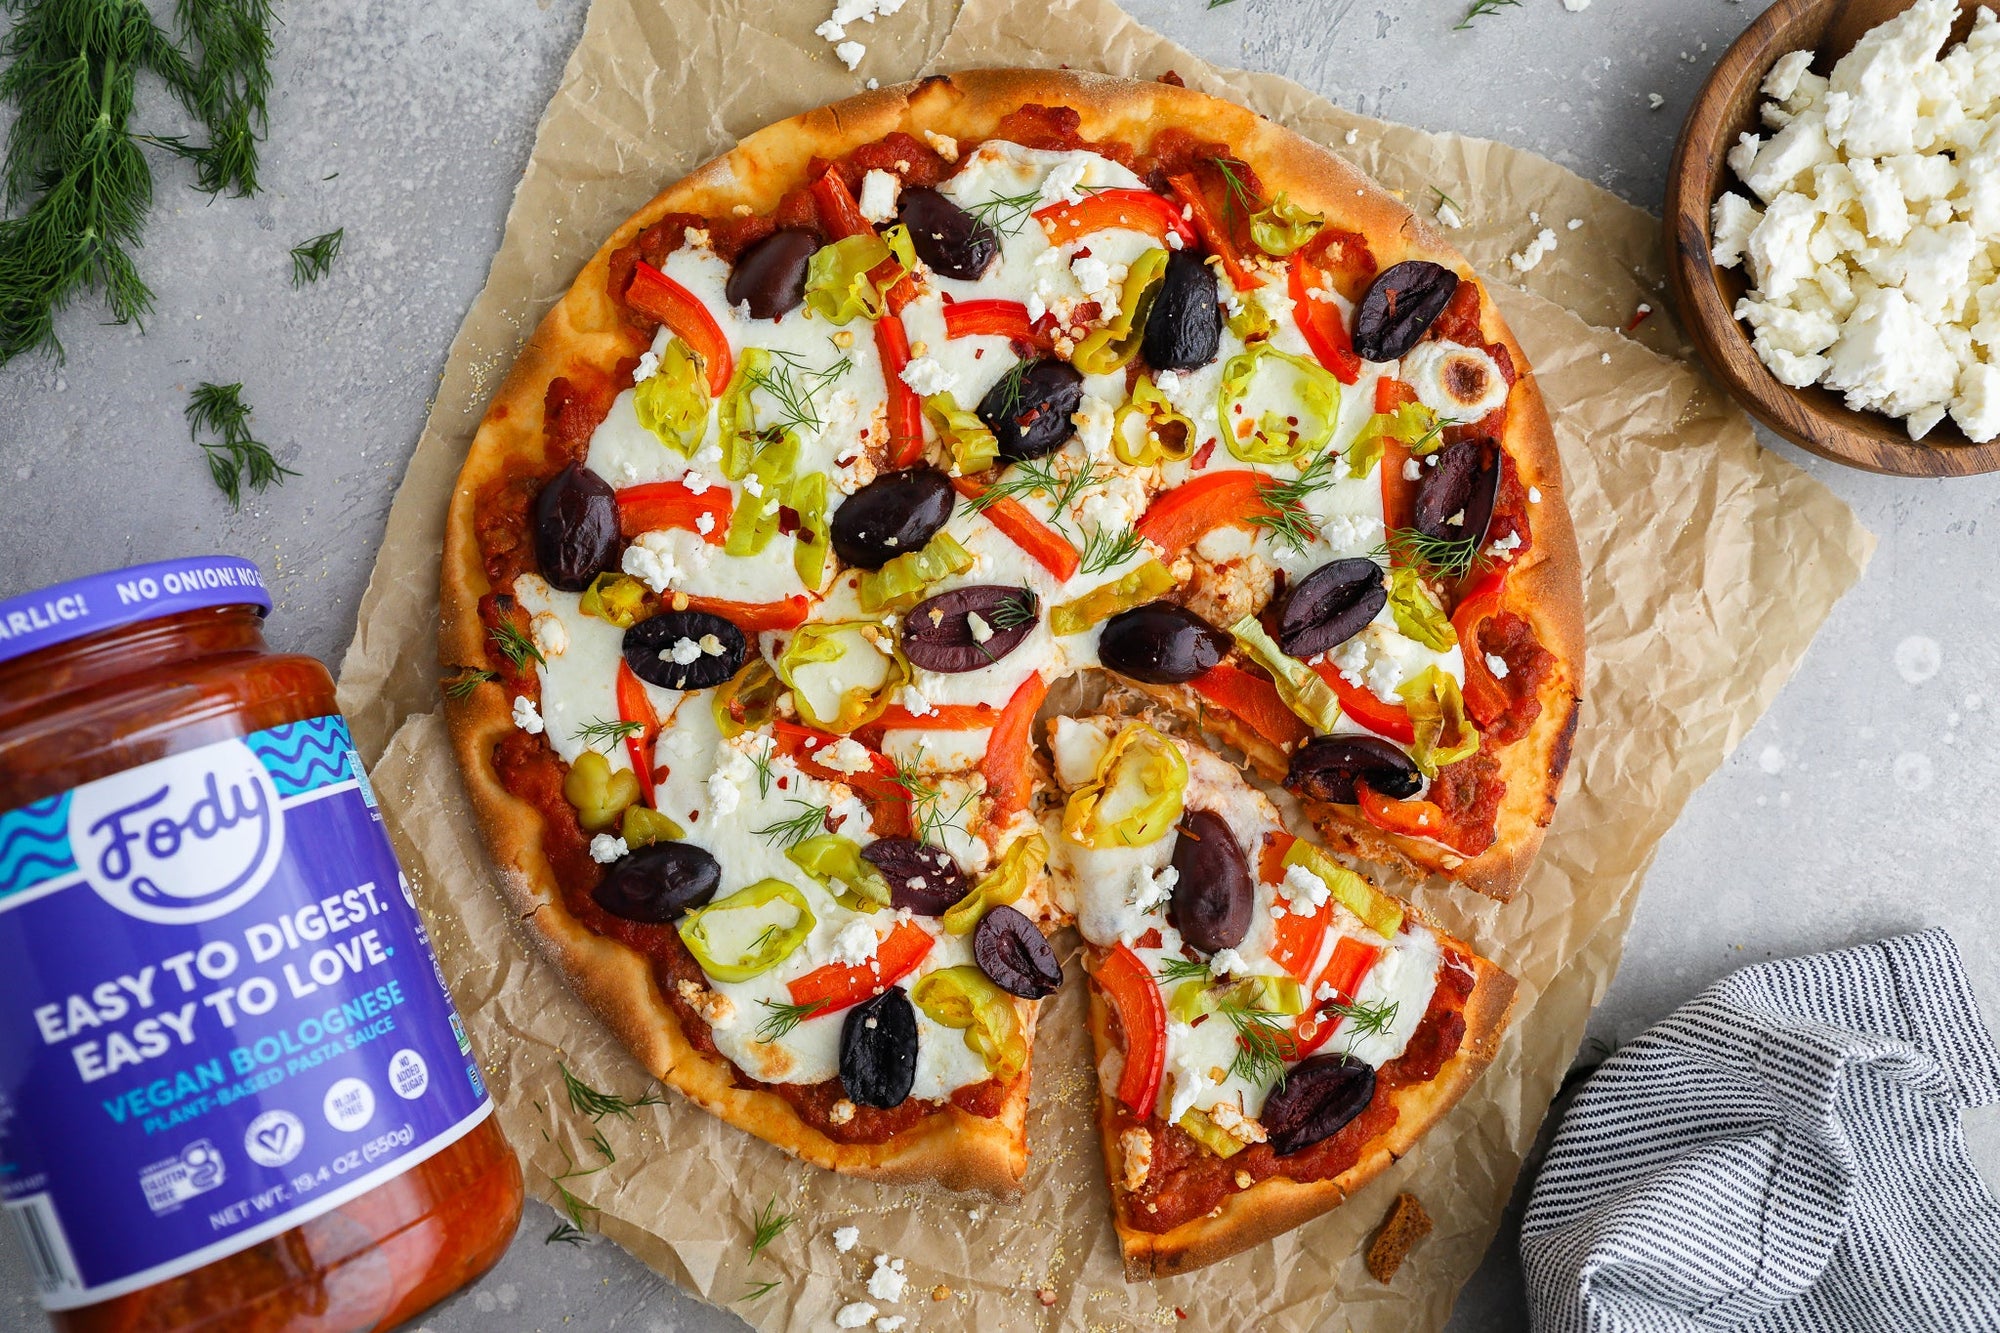 An image of Fody’s gut-friendly Greek pizza. A rustic-looking Greek pizza on a plate beside a bottle of Fody’s Bolognese sauce. 